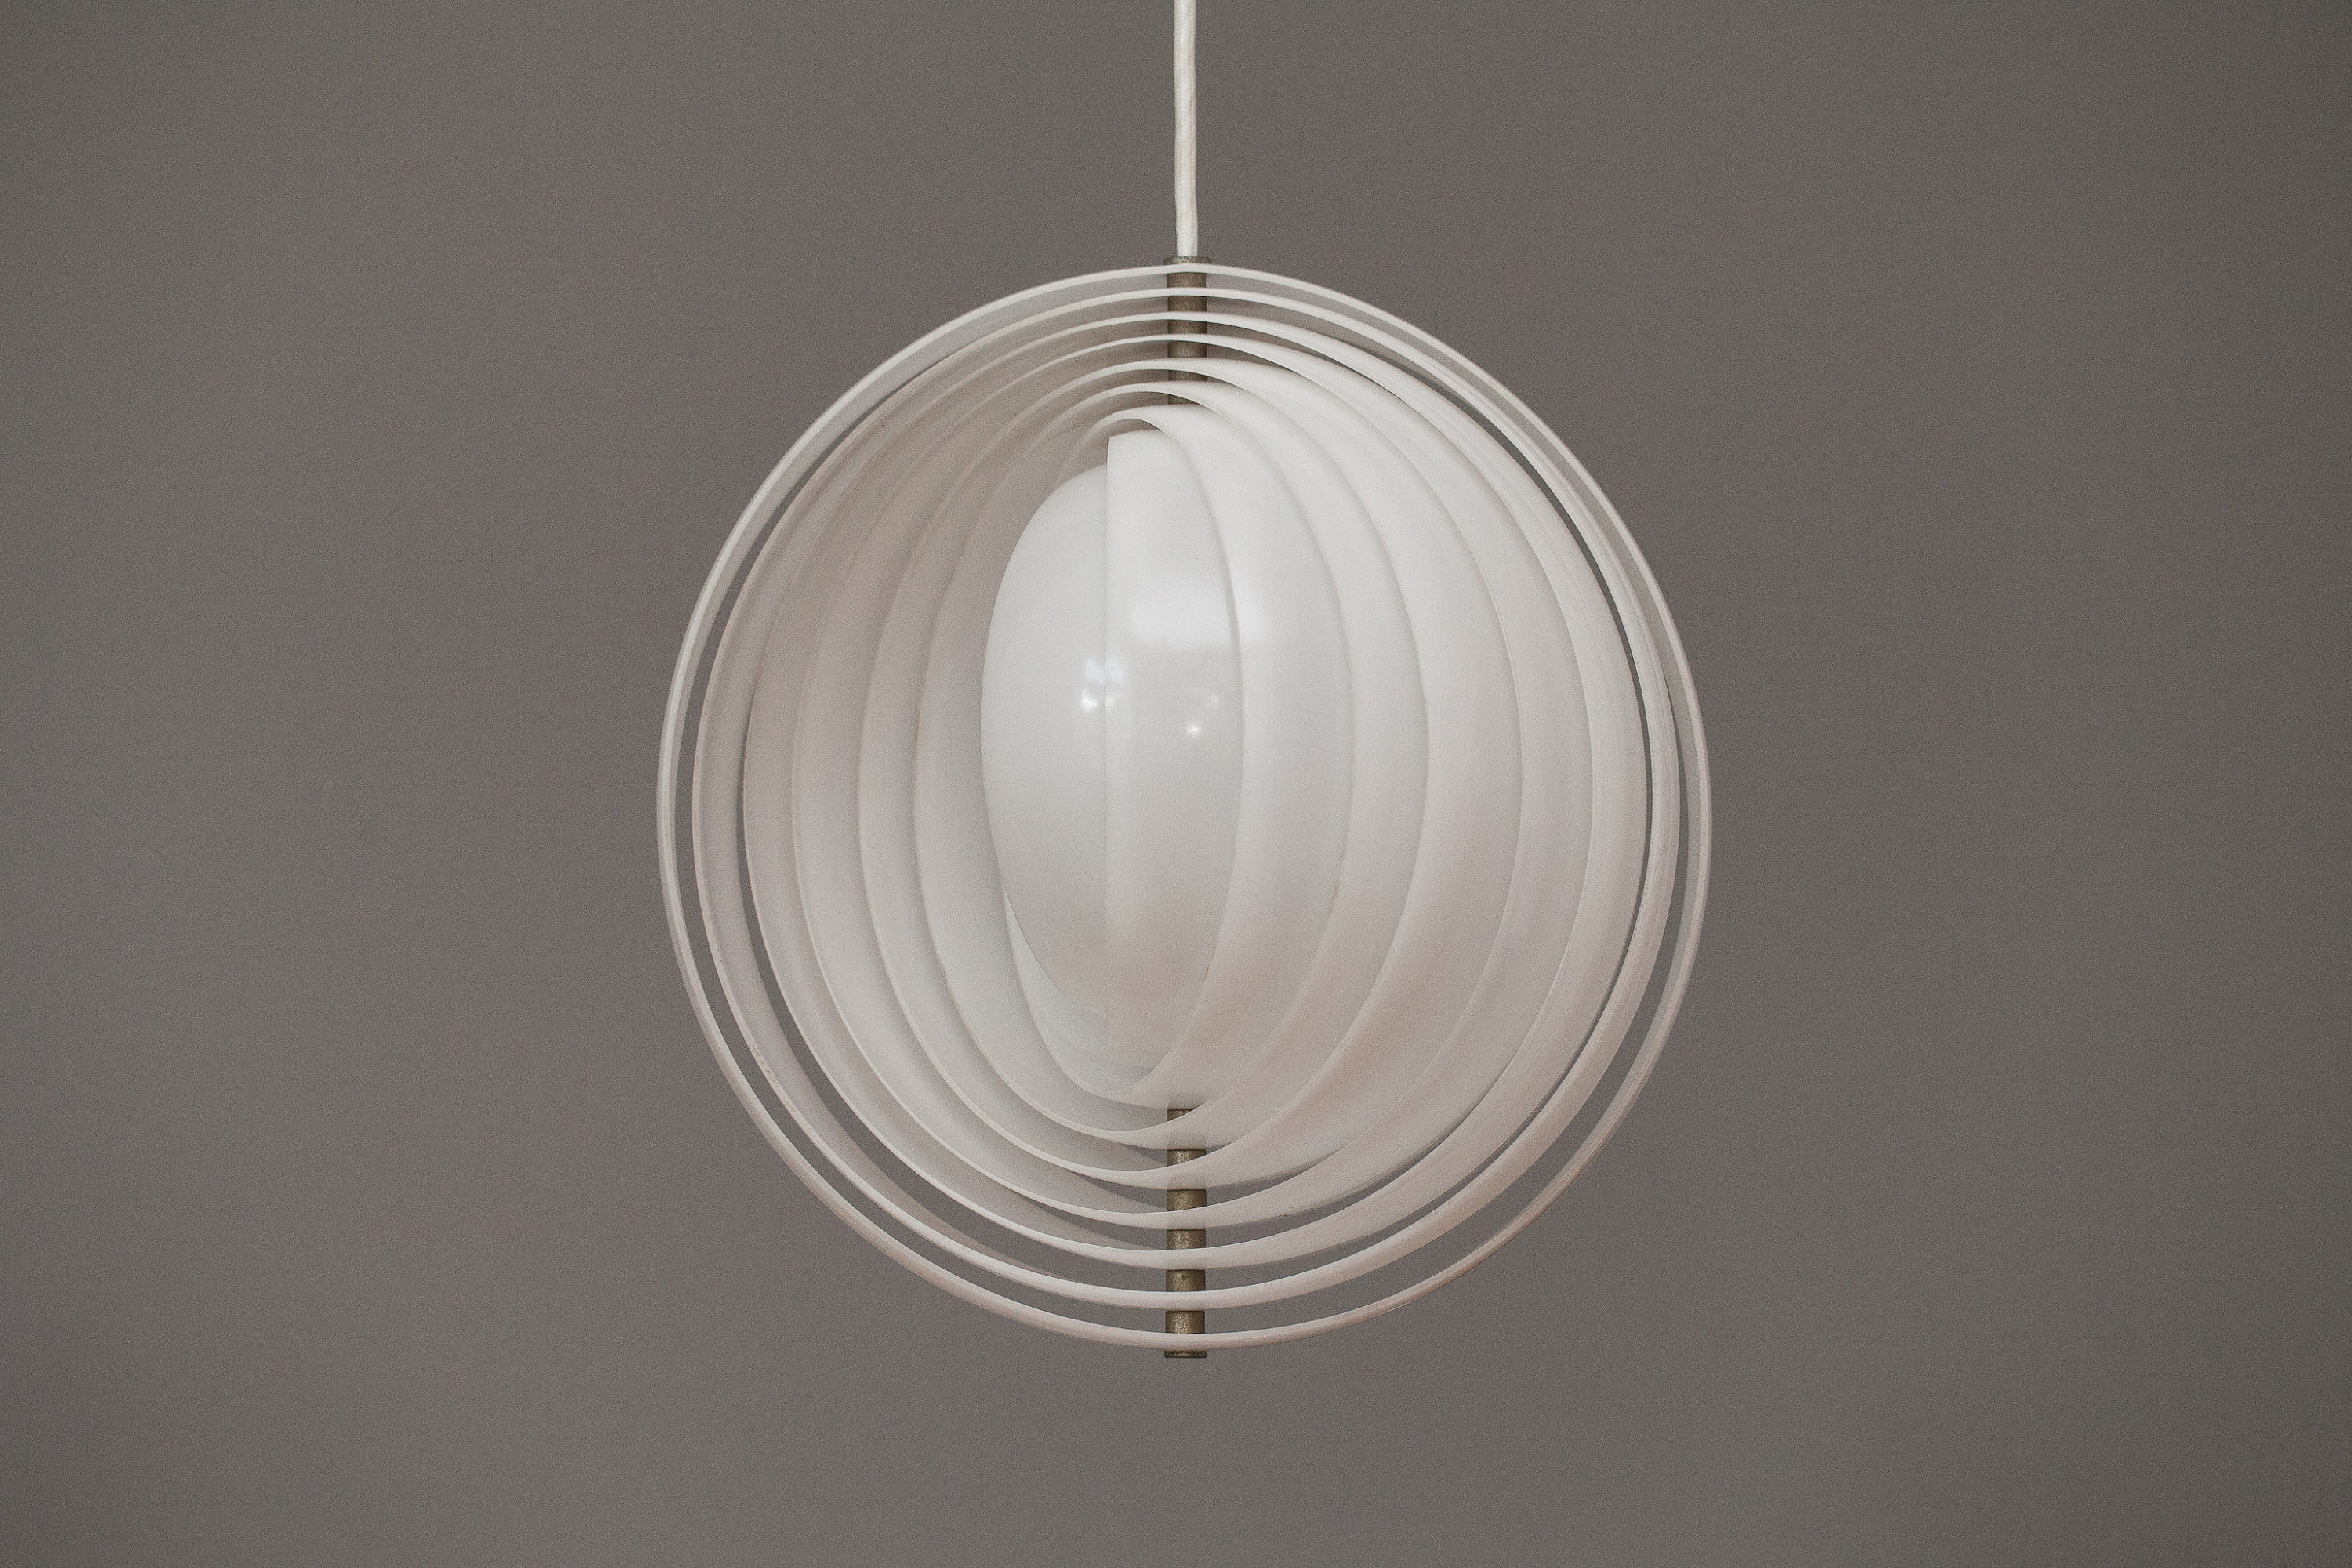 Moon-Lamp by Verner Panton for Louis Poulsen, 1960s for sale at Pamono